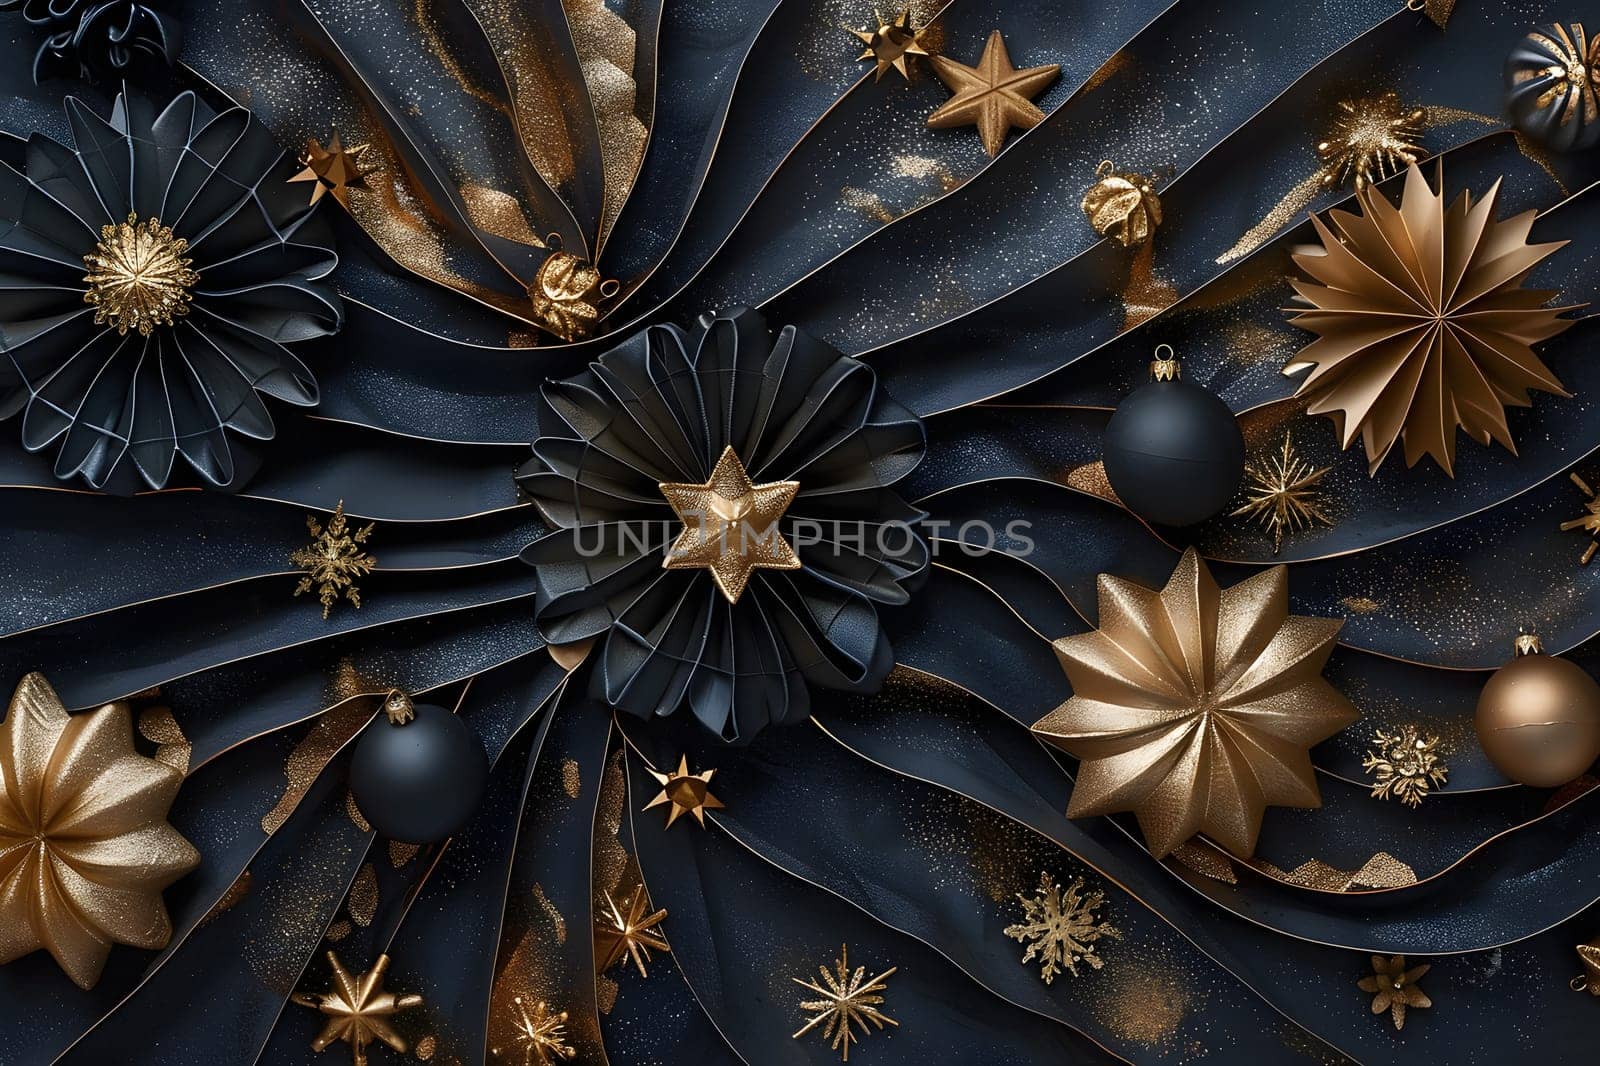 Macro photography capturing the intricate details of a black and gold Christmas decoration, showcasing symmetry and patterns, resembling a terrestrial plant with electric blue accents